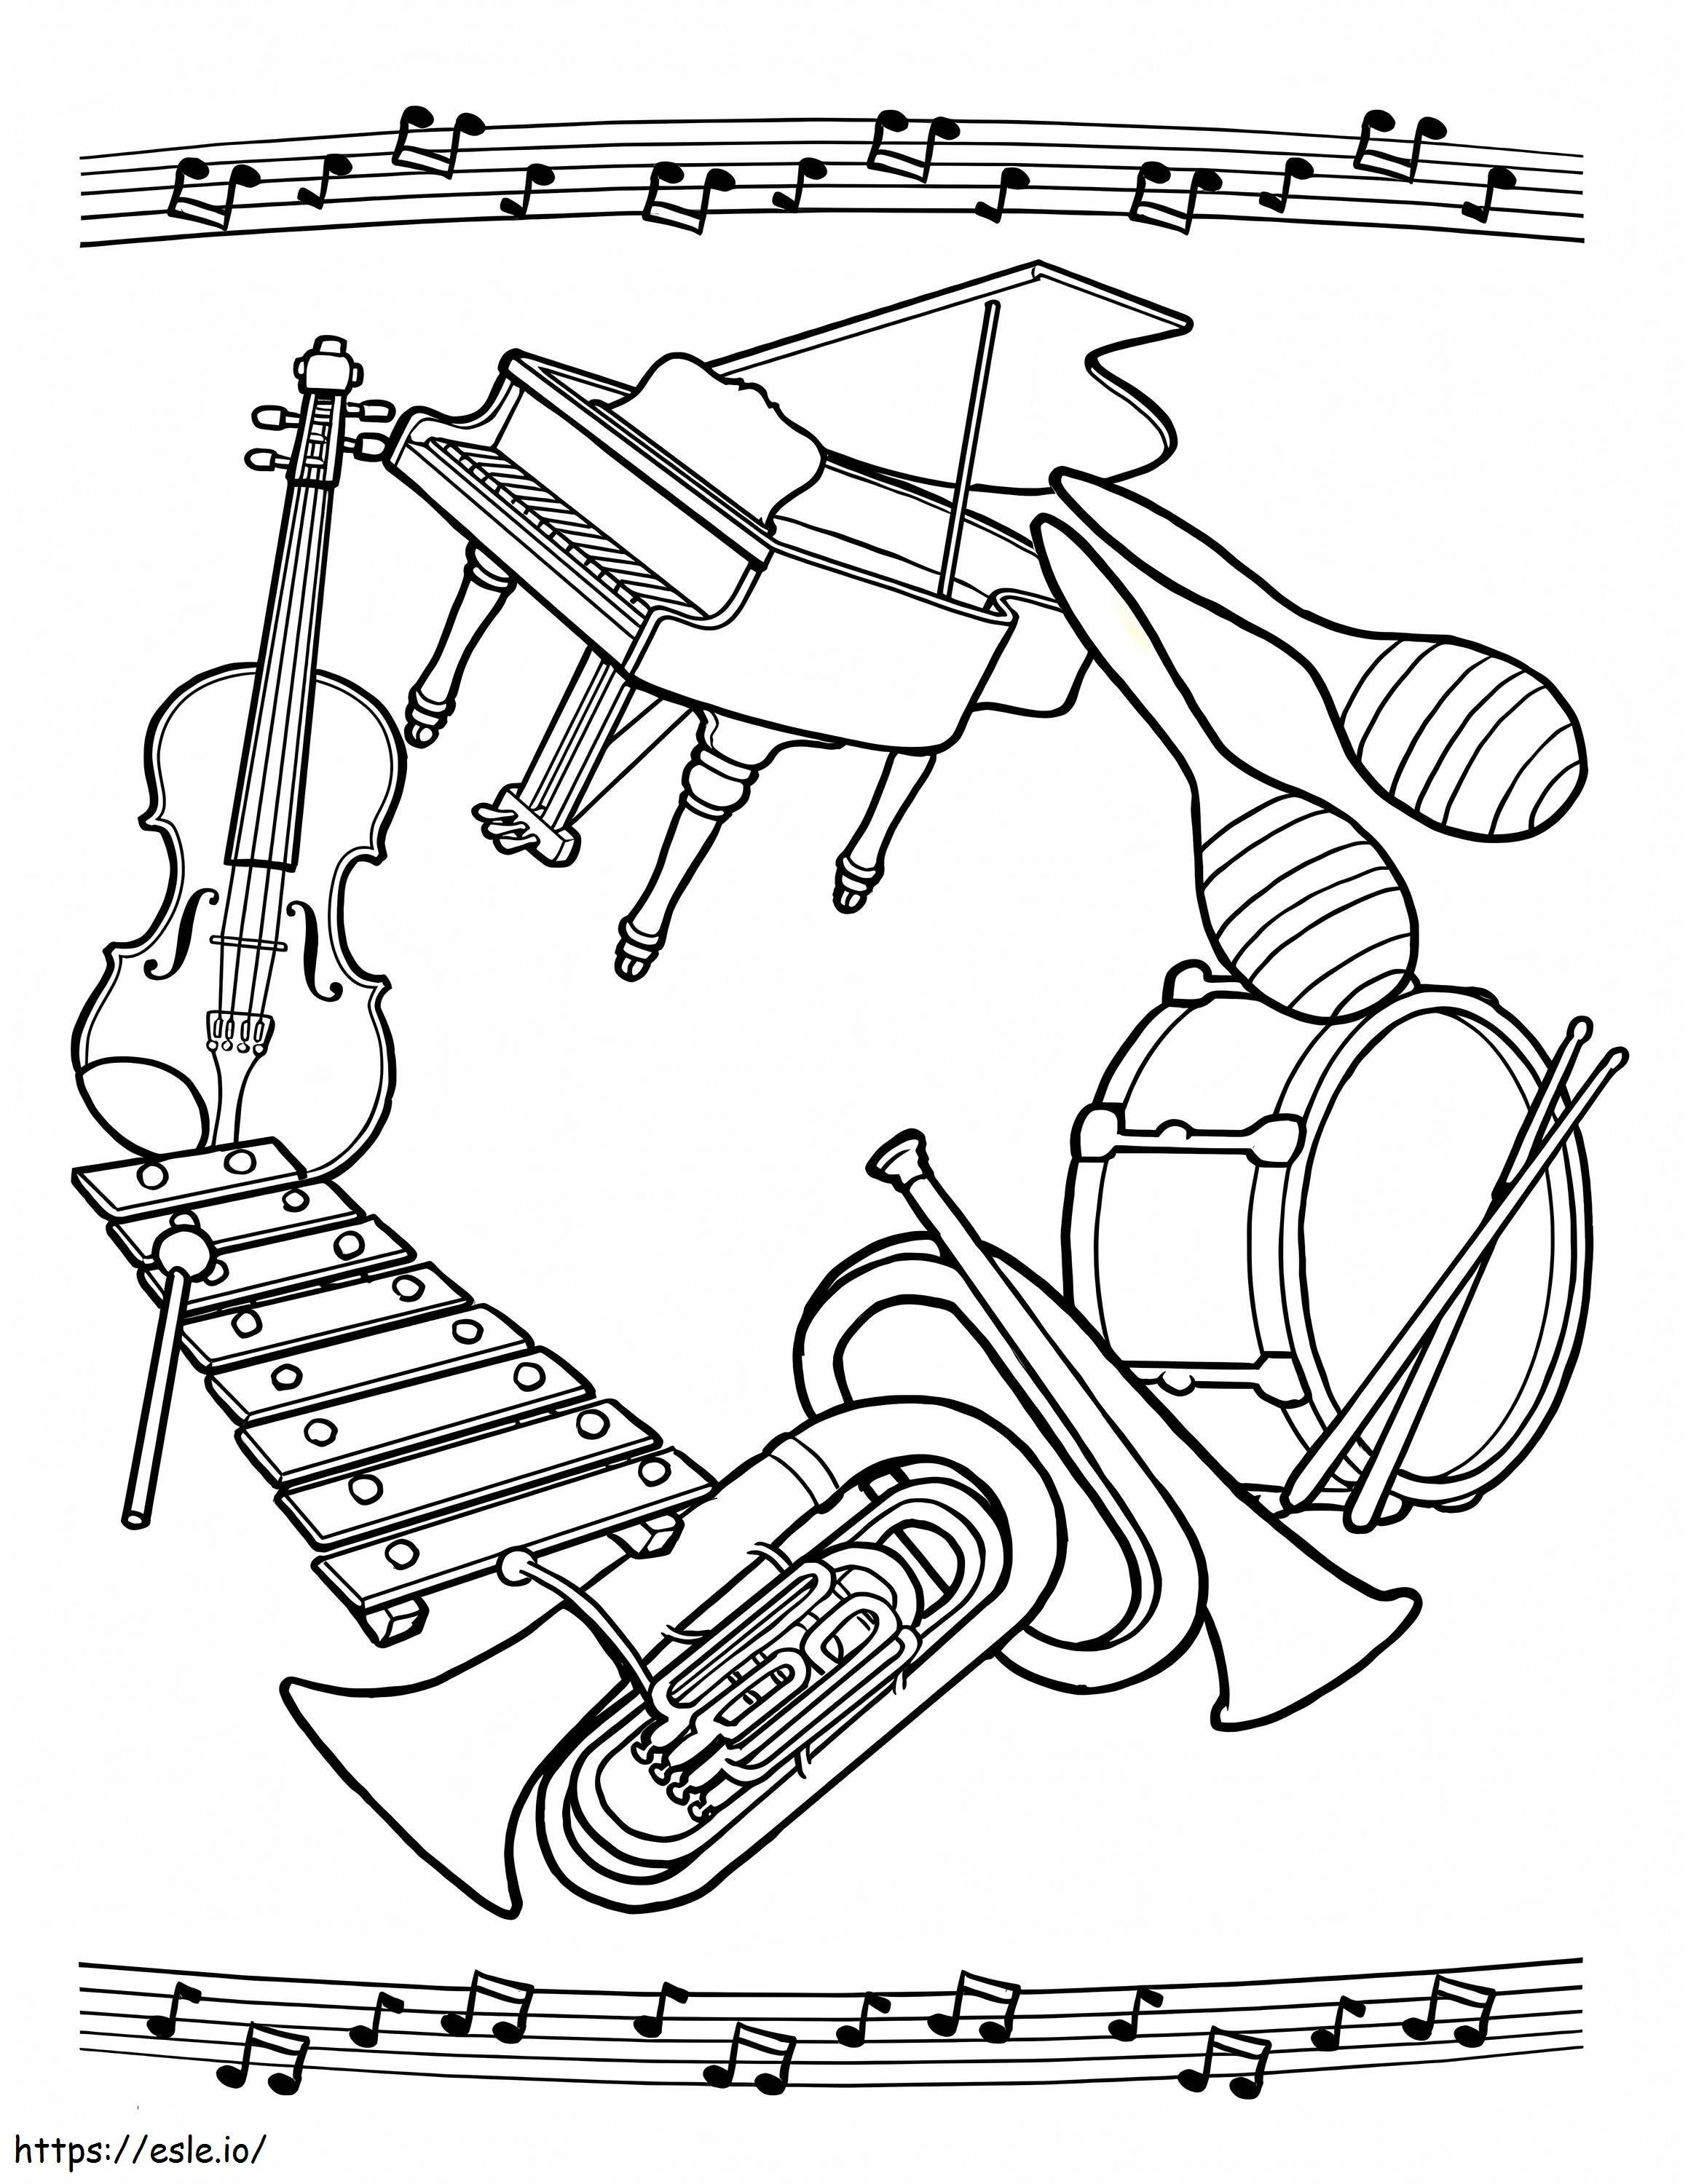 Basic Musical Instrument coloring page